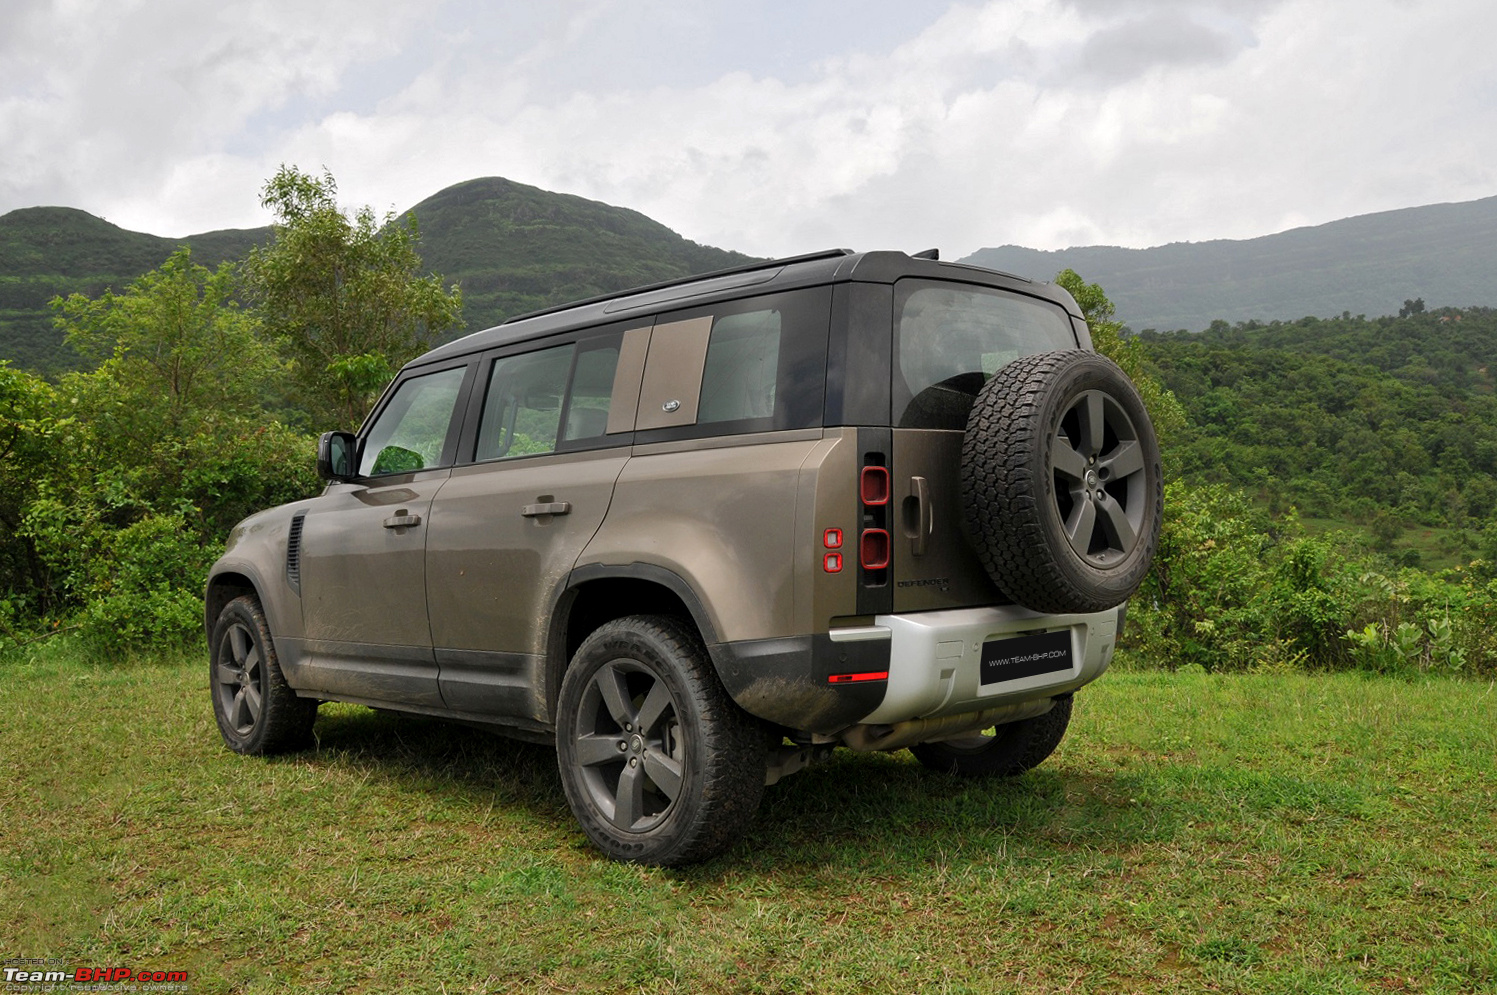 Land Rover Defender review - The India test